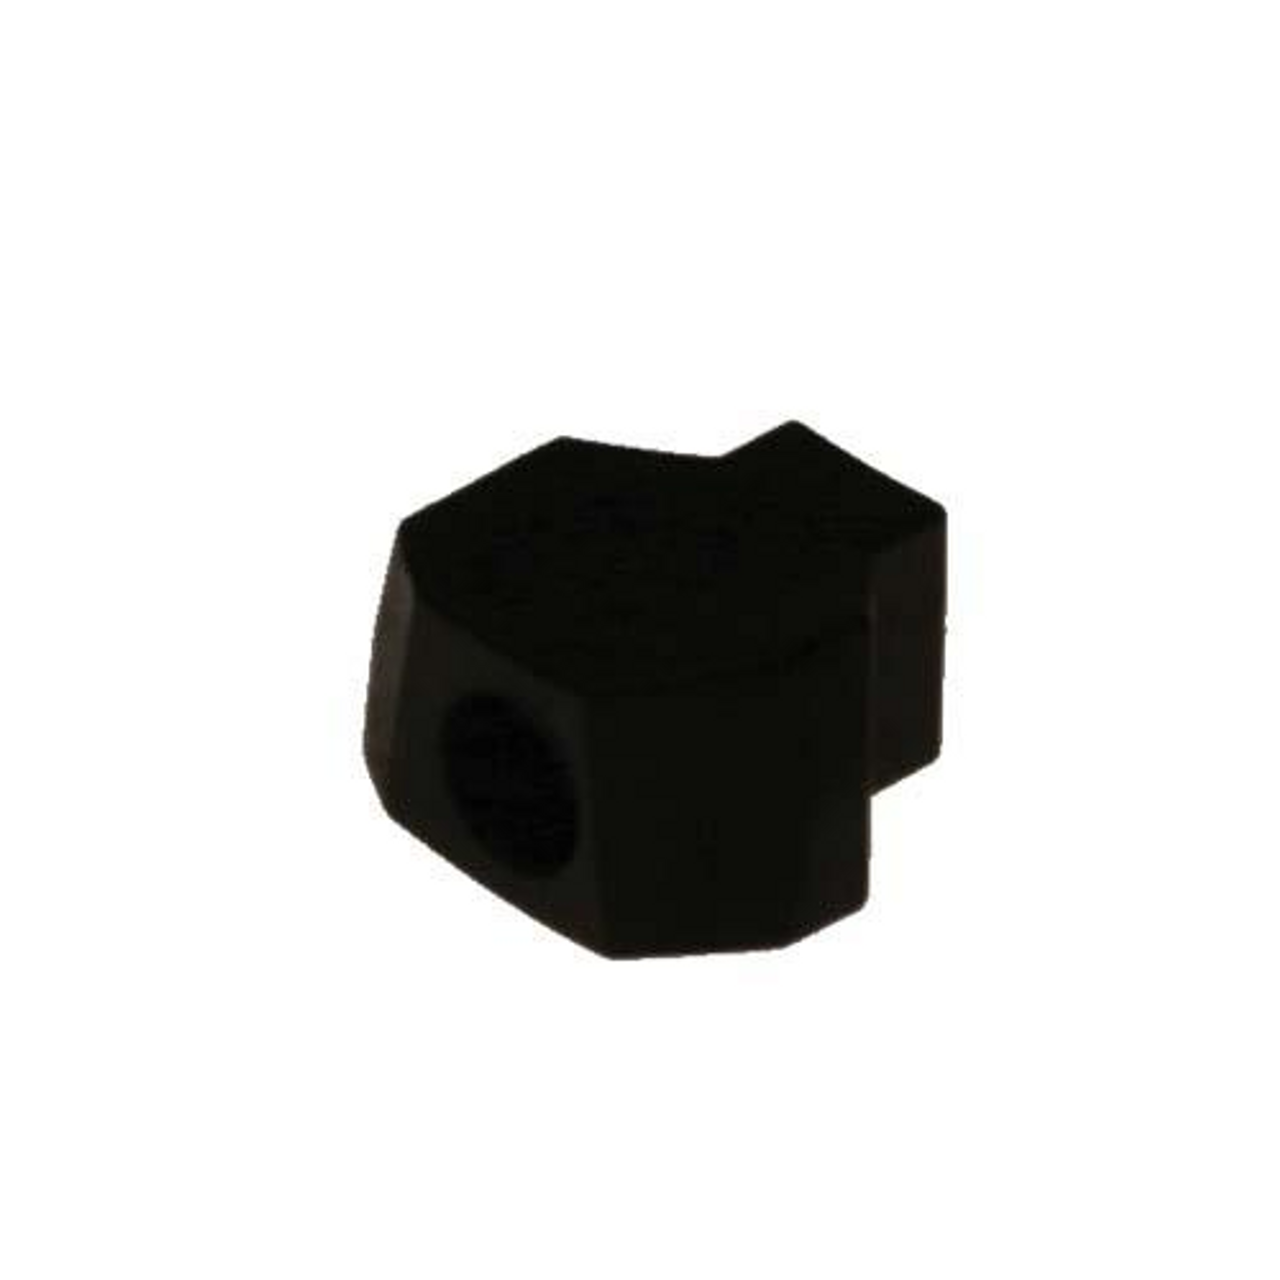 Ramp Button, 4 Cycle, 28 Degree, 7849, 72324-G01